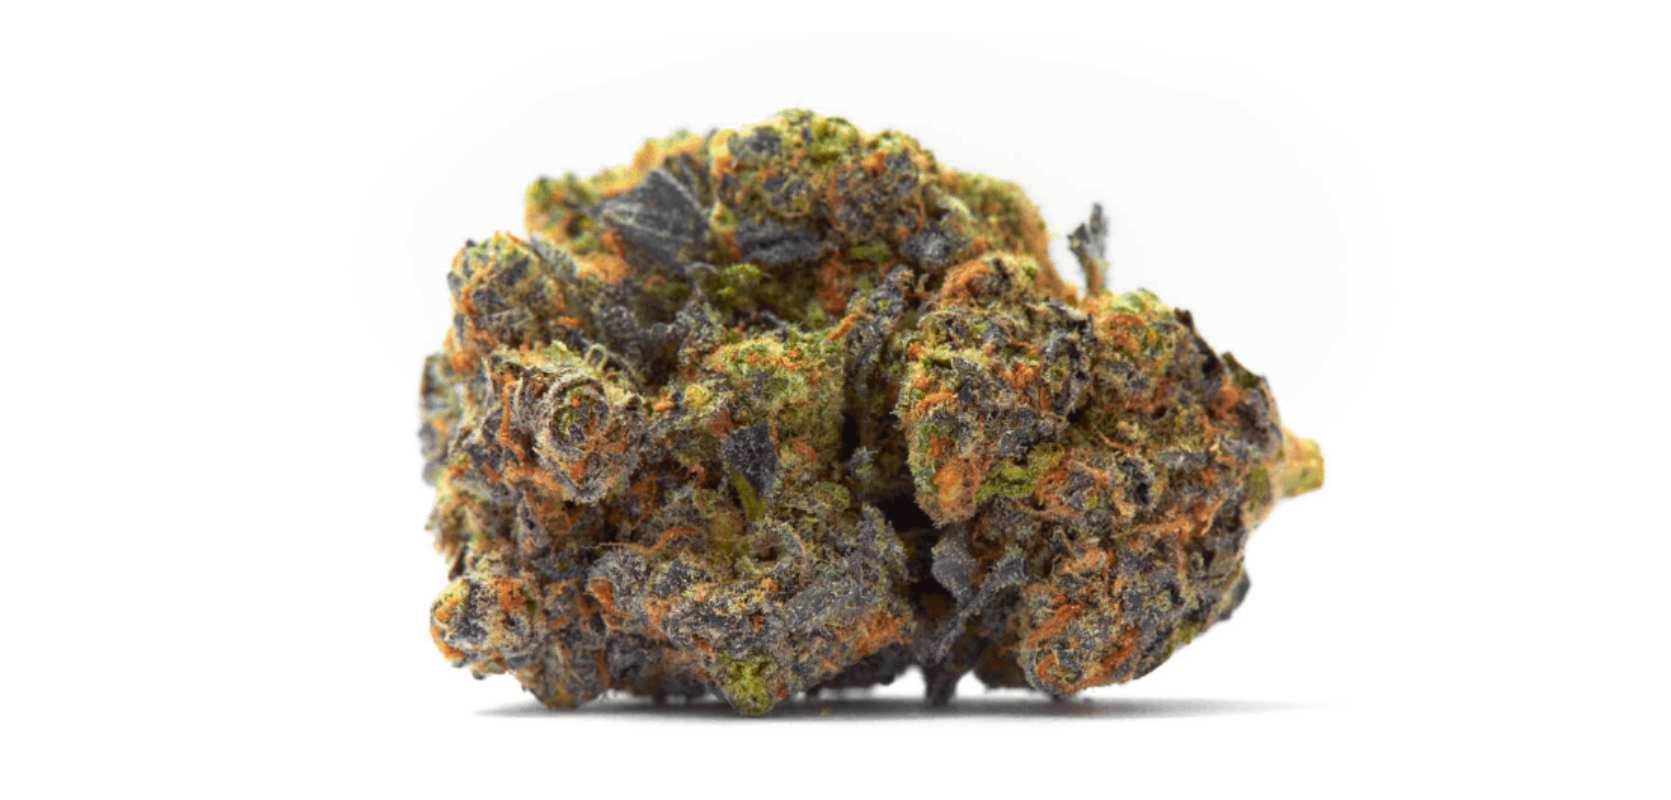 If you're looking for a delicious and potent strain, look no further than strains named after baked goods. An Online Dispensary Review of the Jungle Cake Strain.